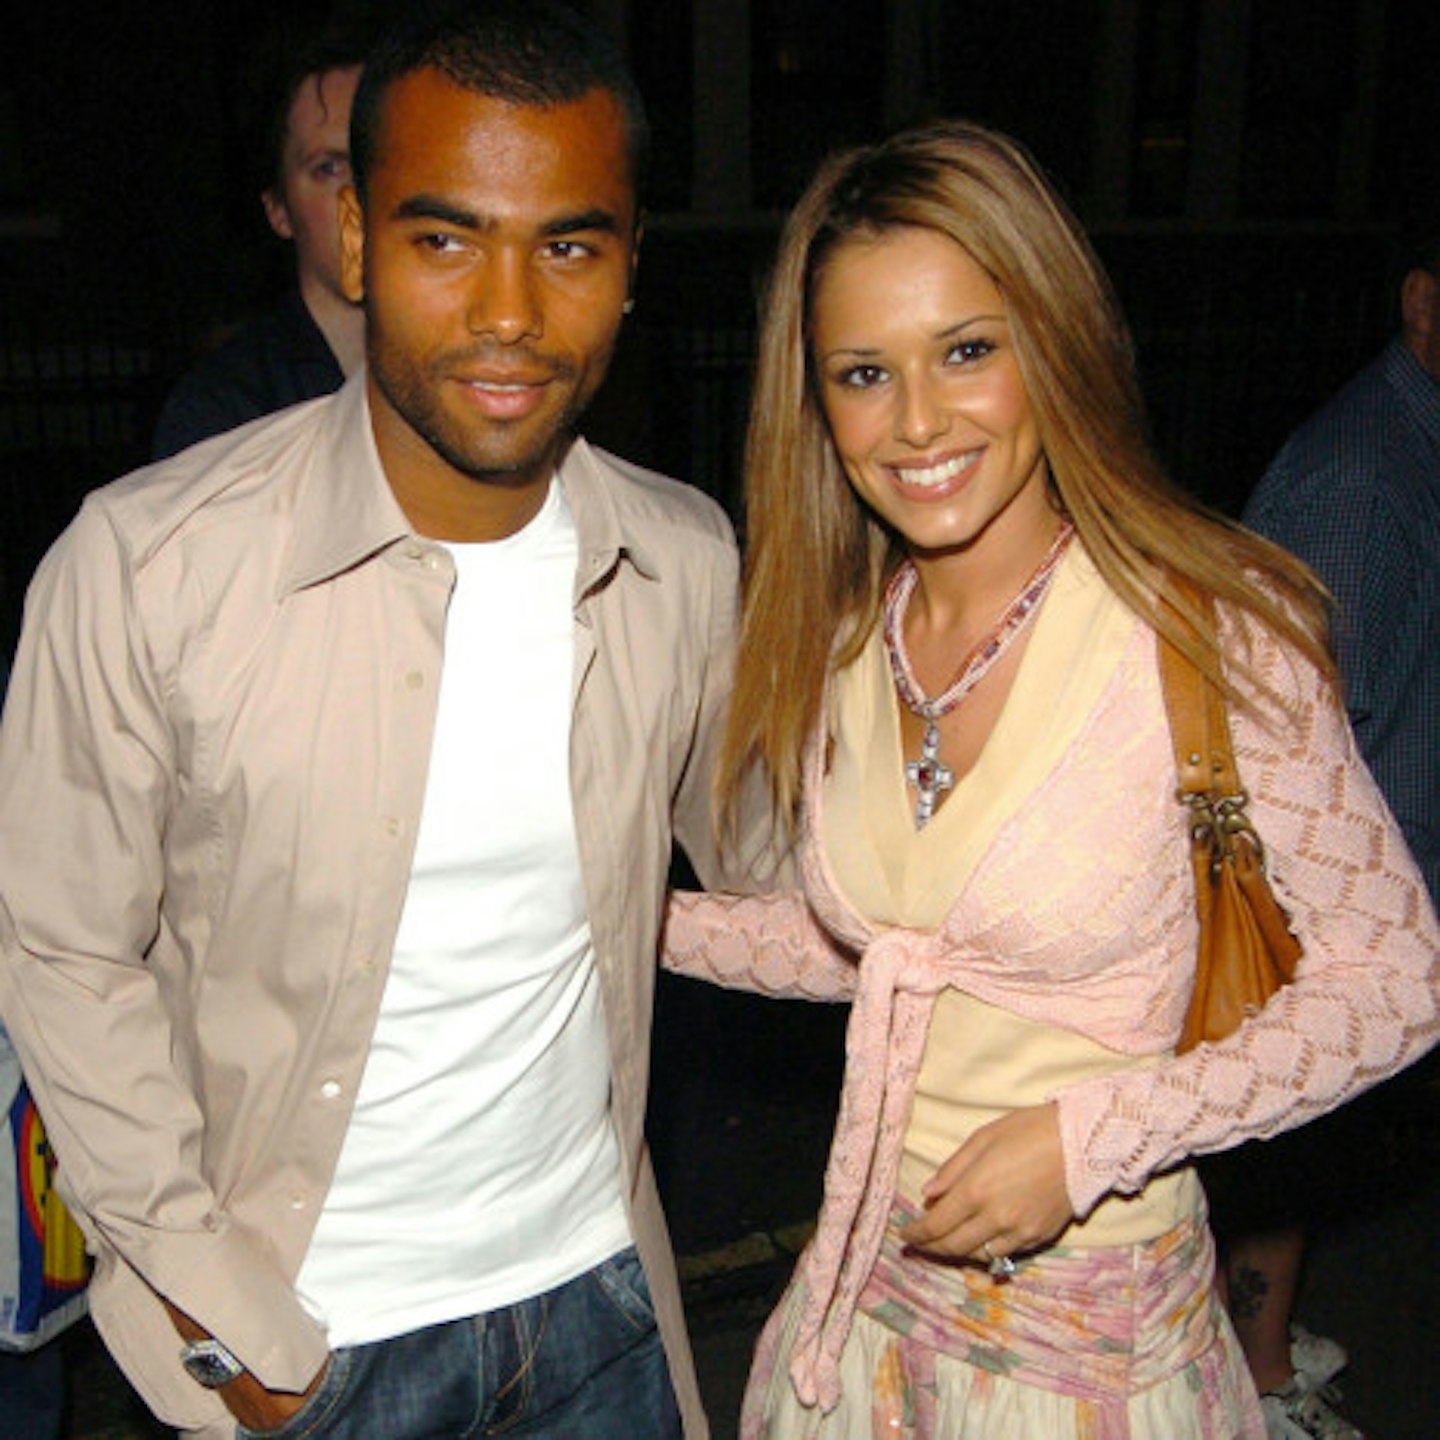 Ashley and Cheryl in 2005